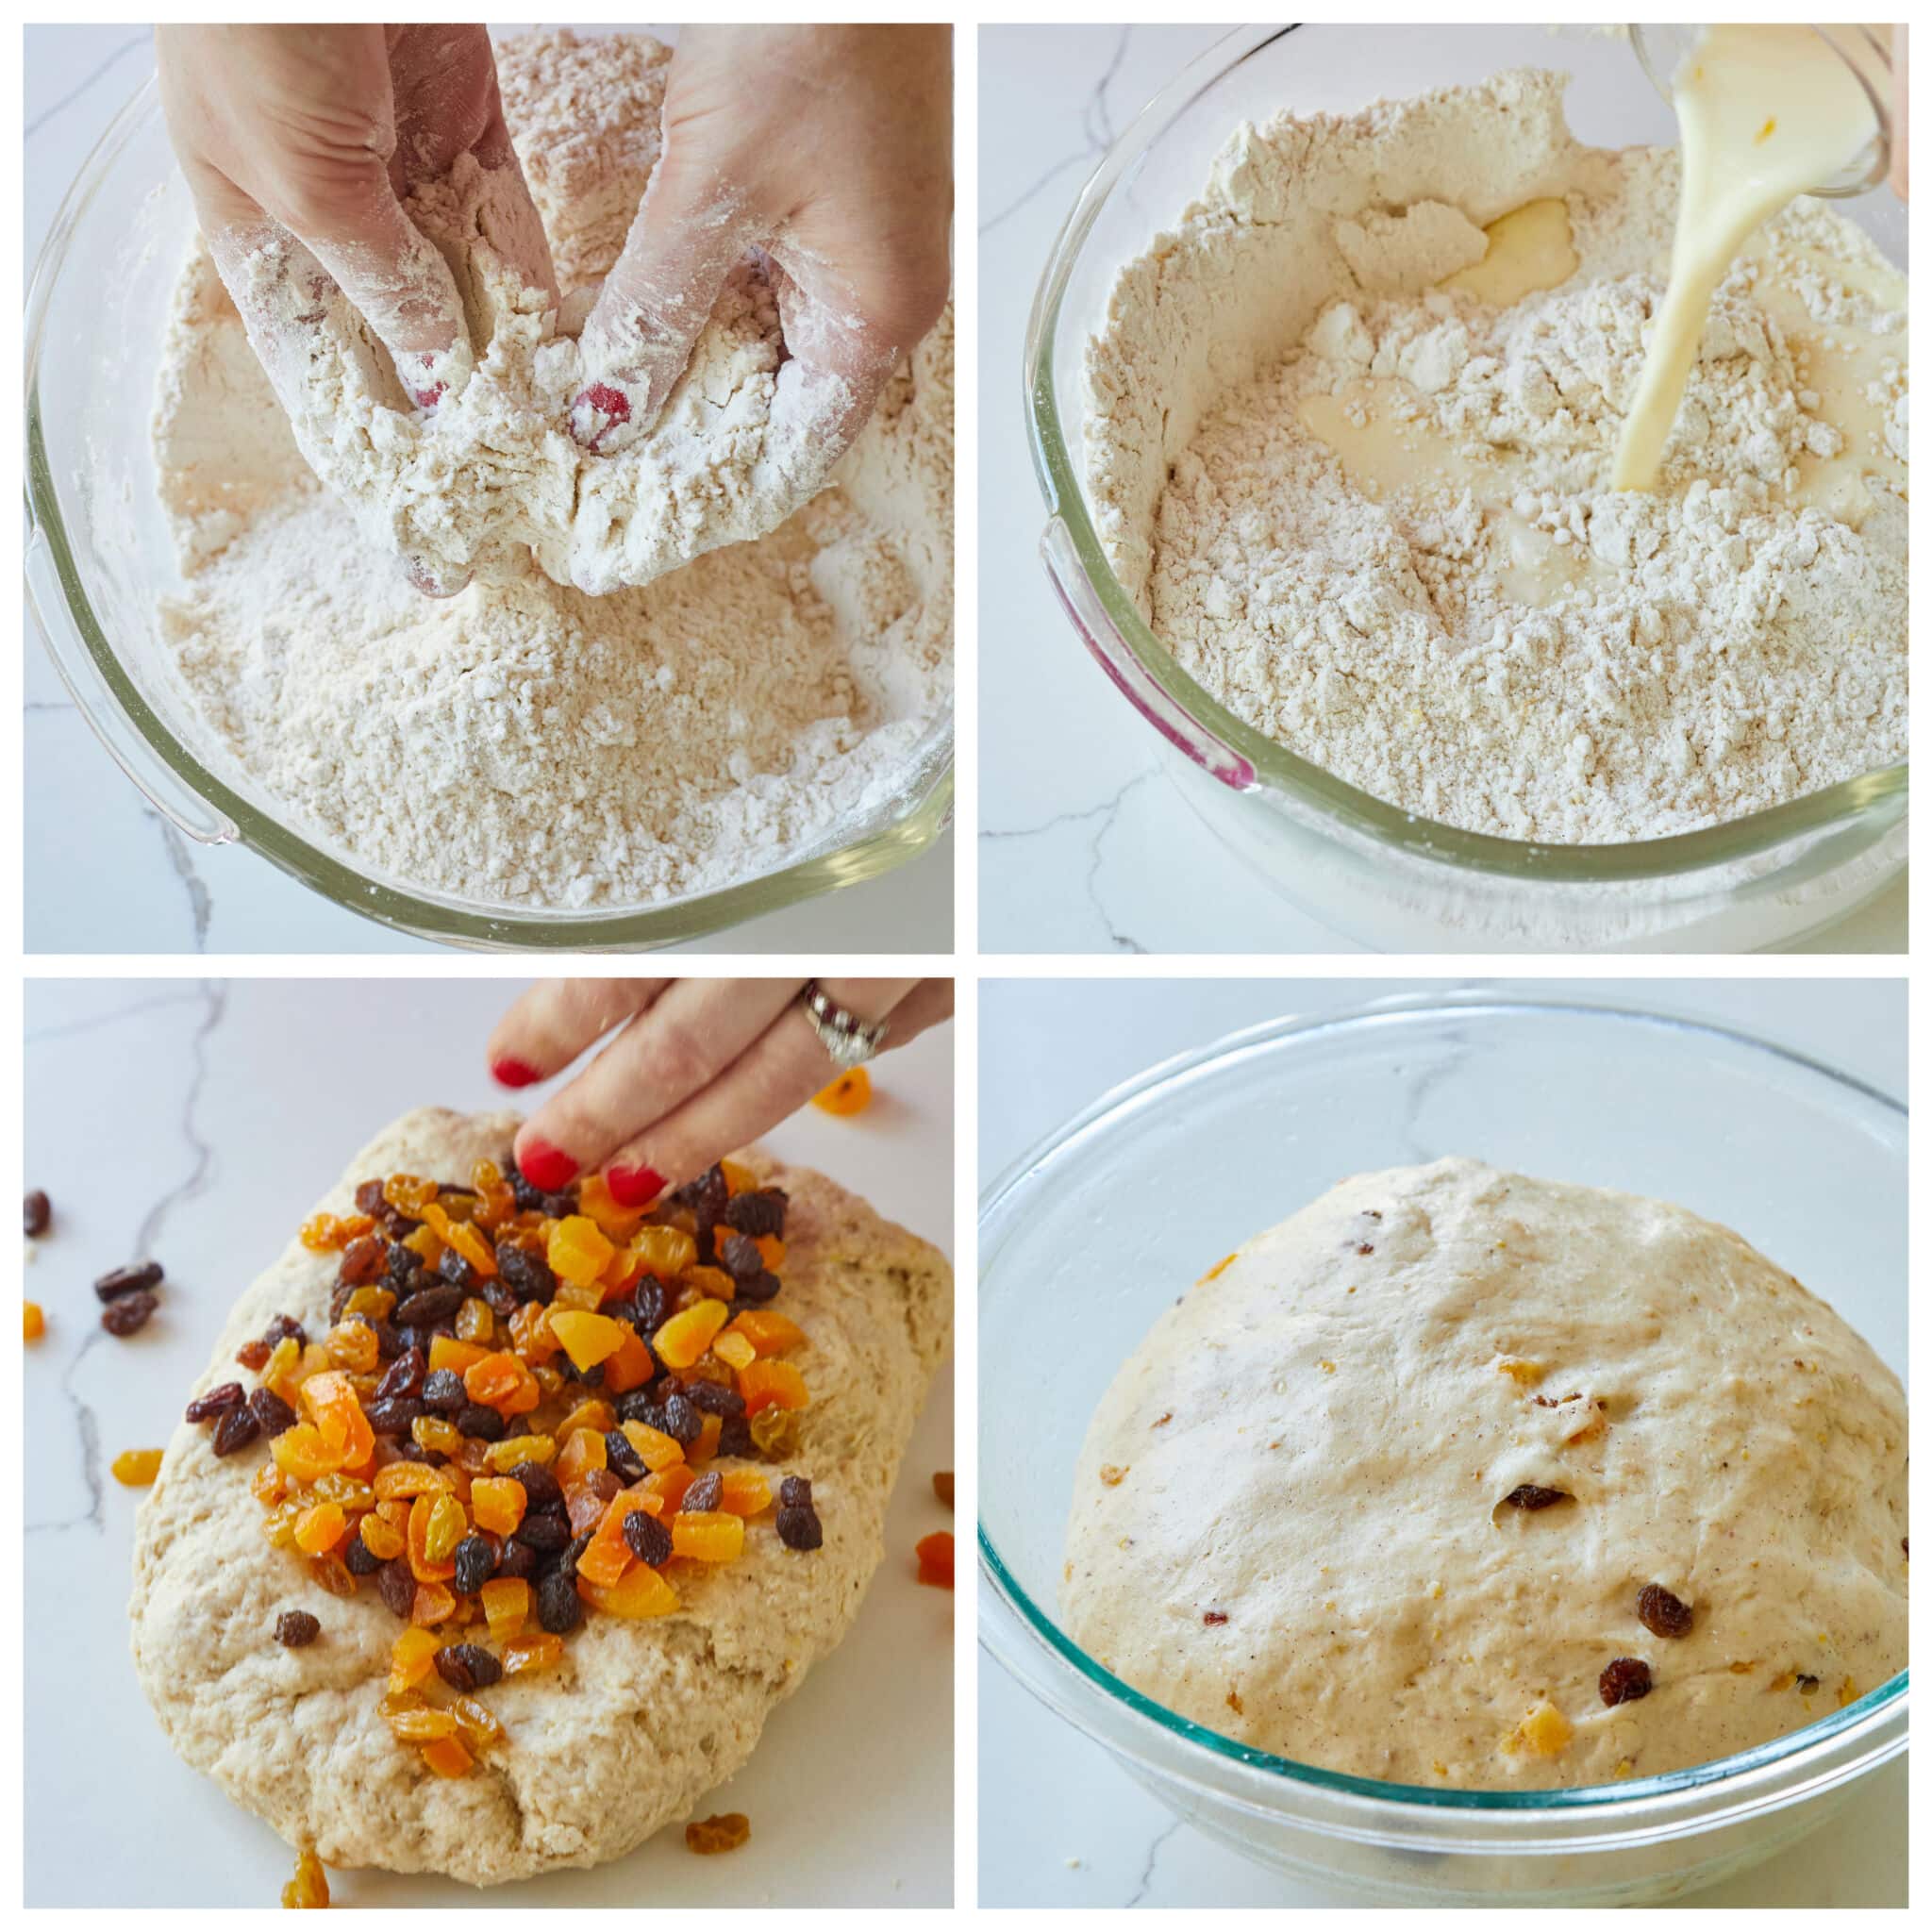 Step by step instructions for how to Make Hot Cross Buns dough